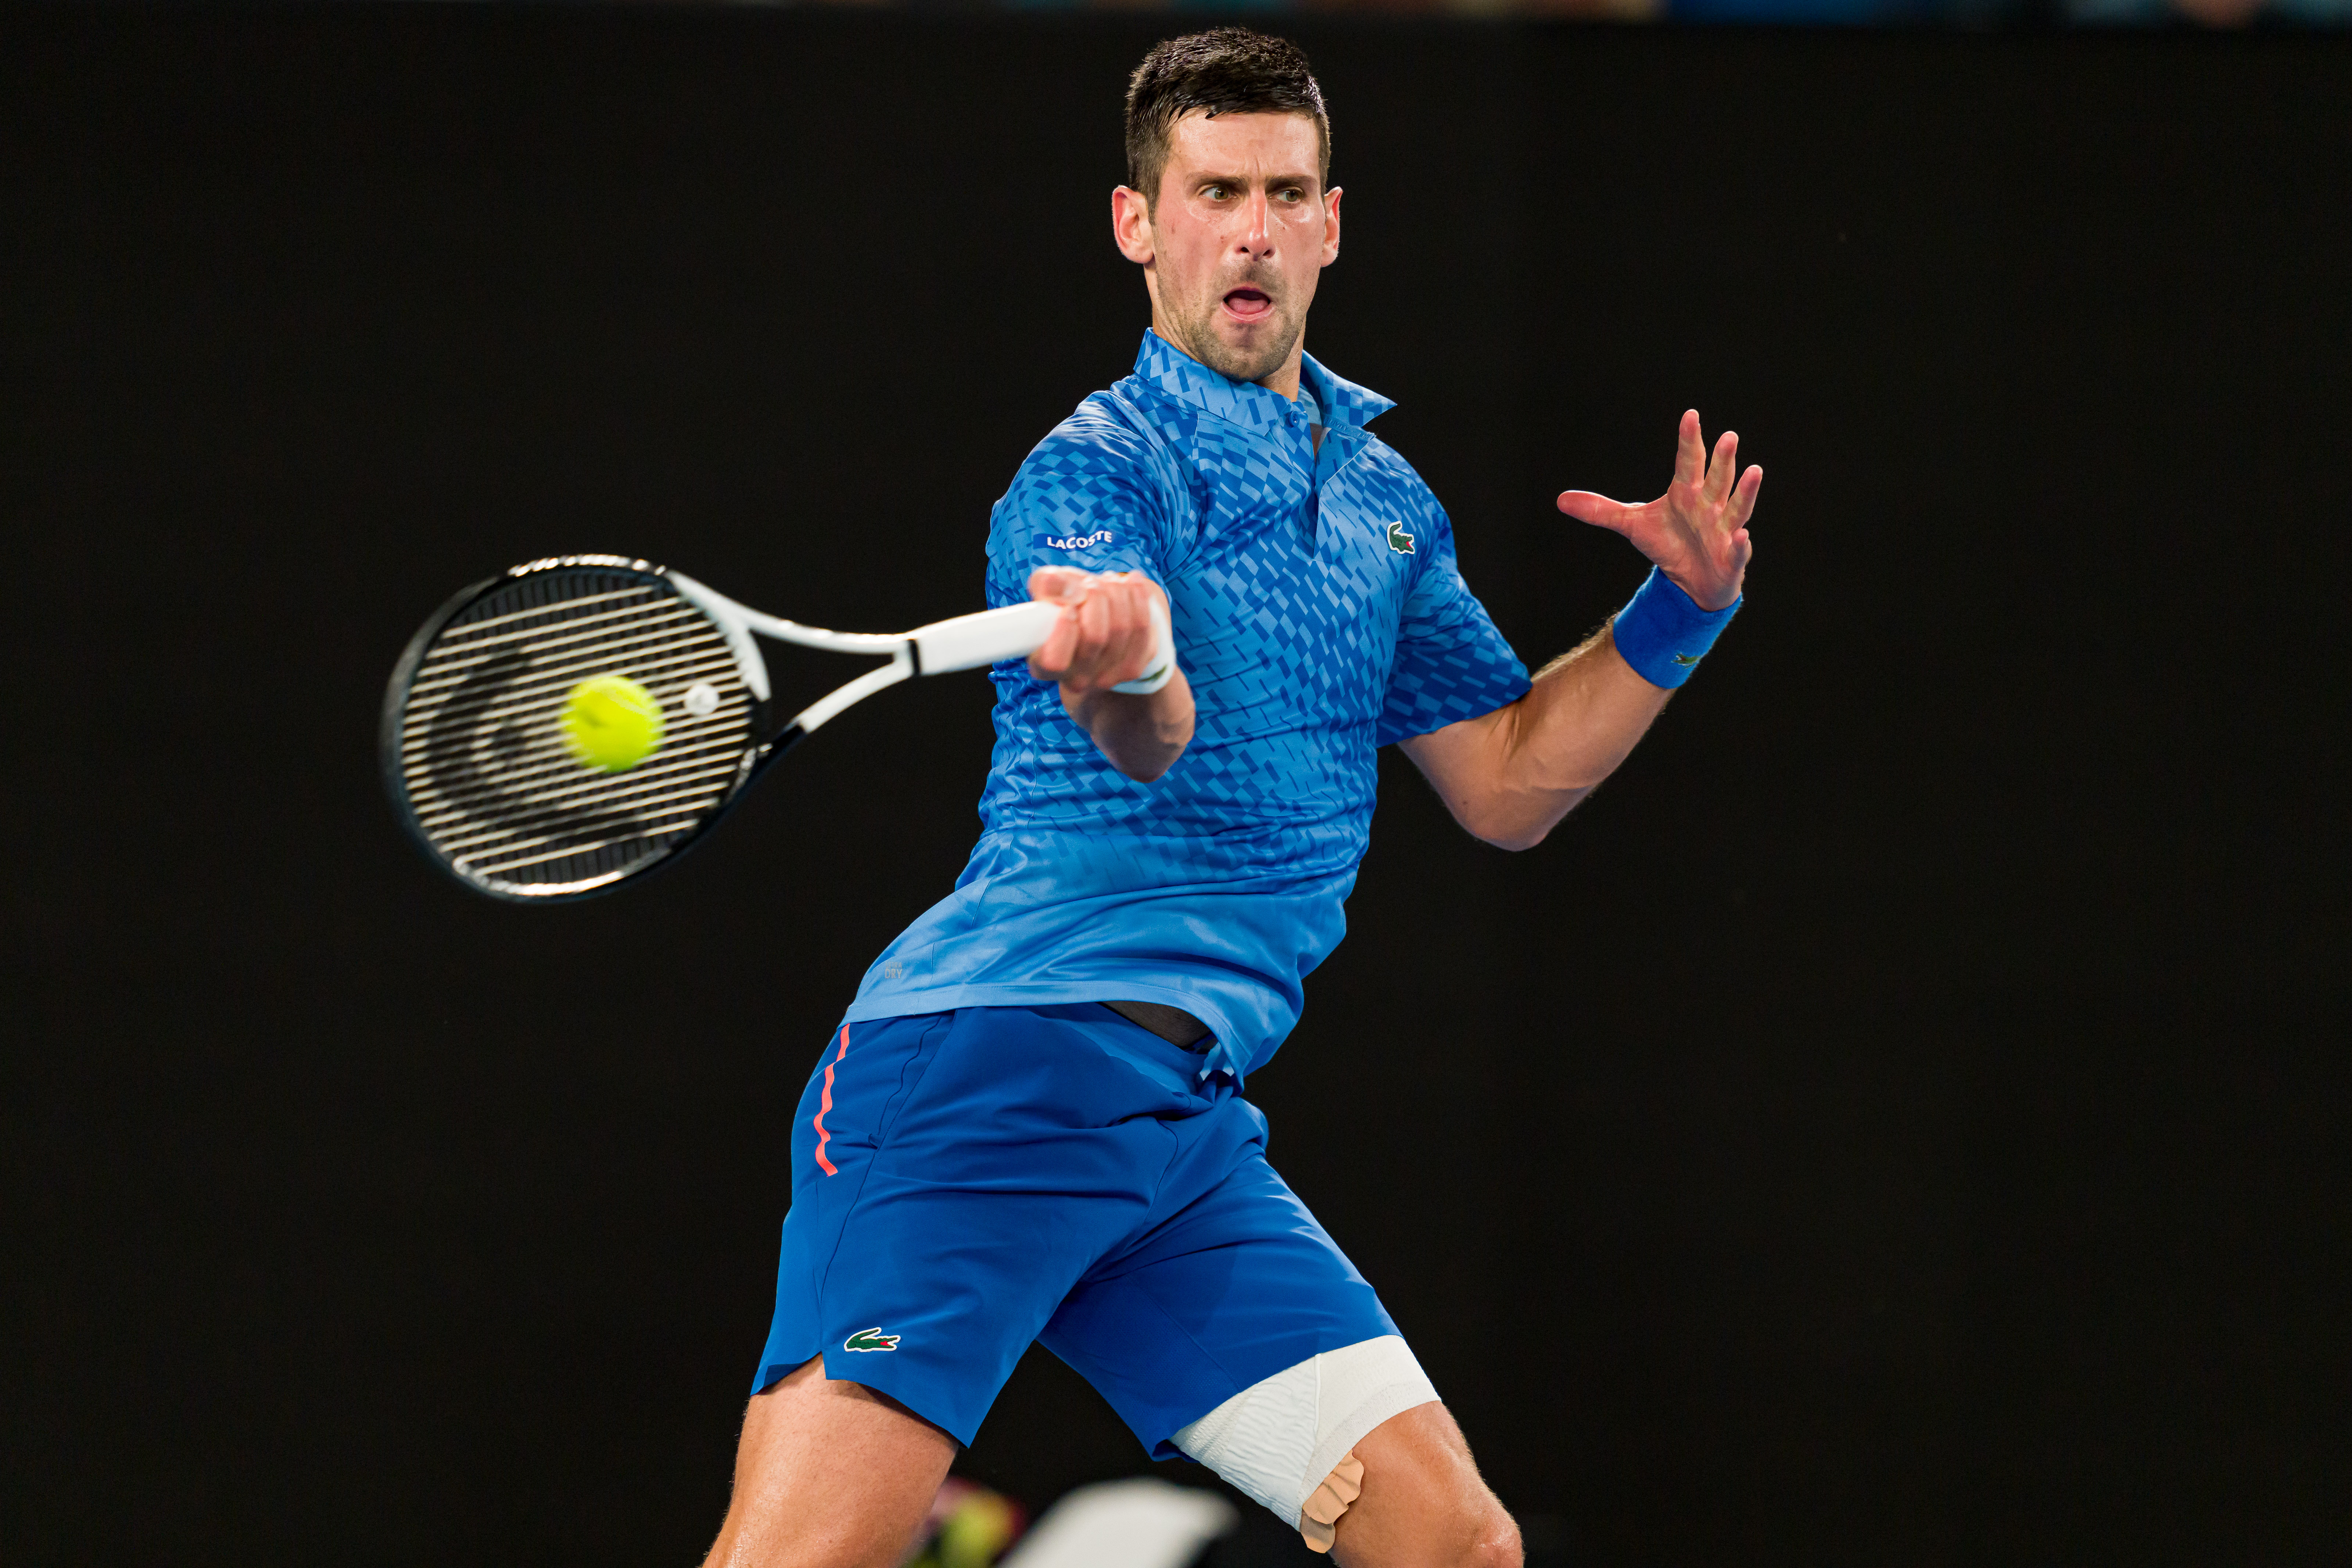 Novak Djokovic of Serbia plays forehand in the Semifinal singles match against Tommy Paul of the United States during day 12 of the 2023 Australian Open at Melbourne Park on January 27, 2023 in Melbourne, Australia.